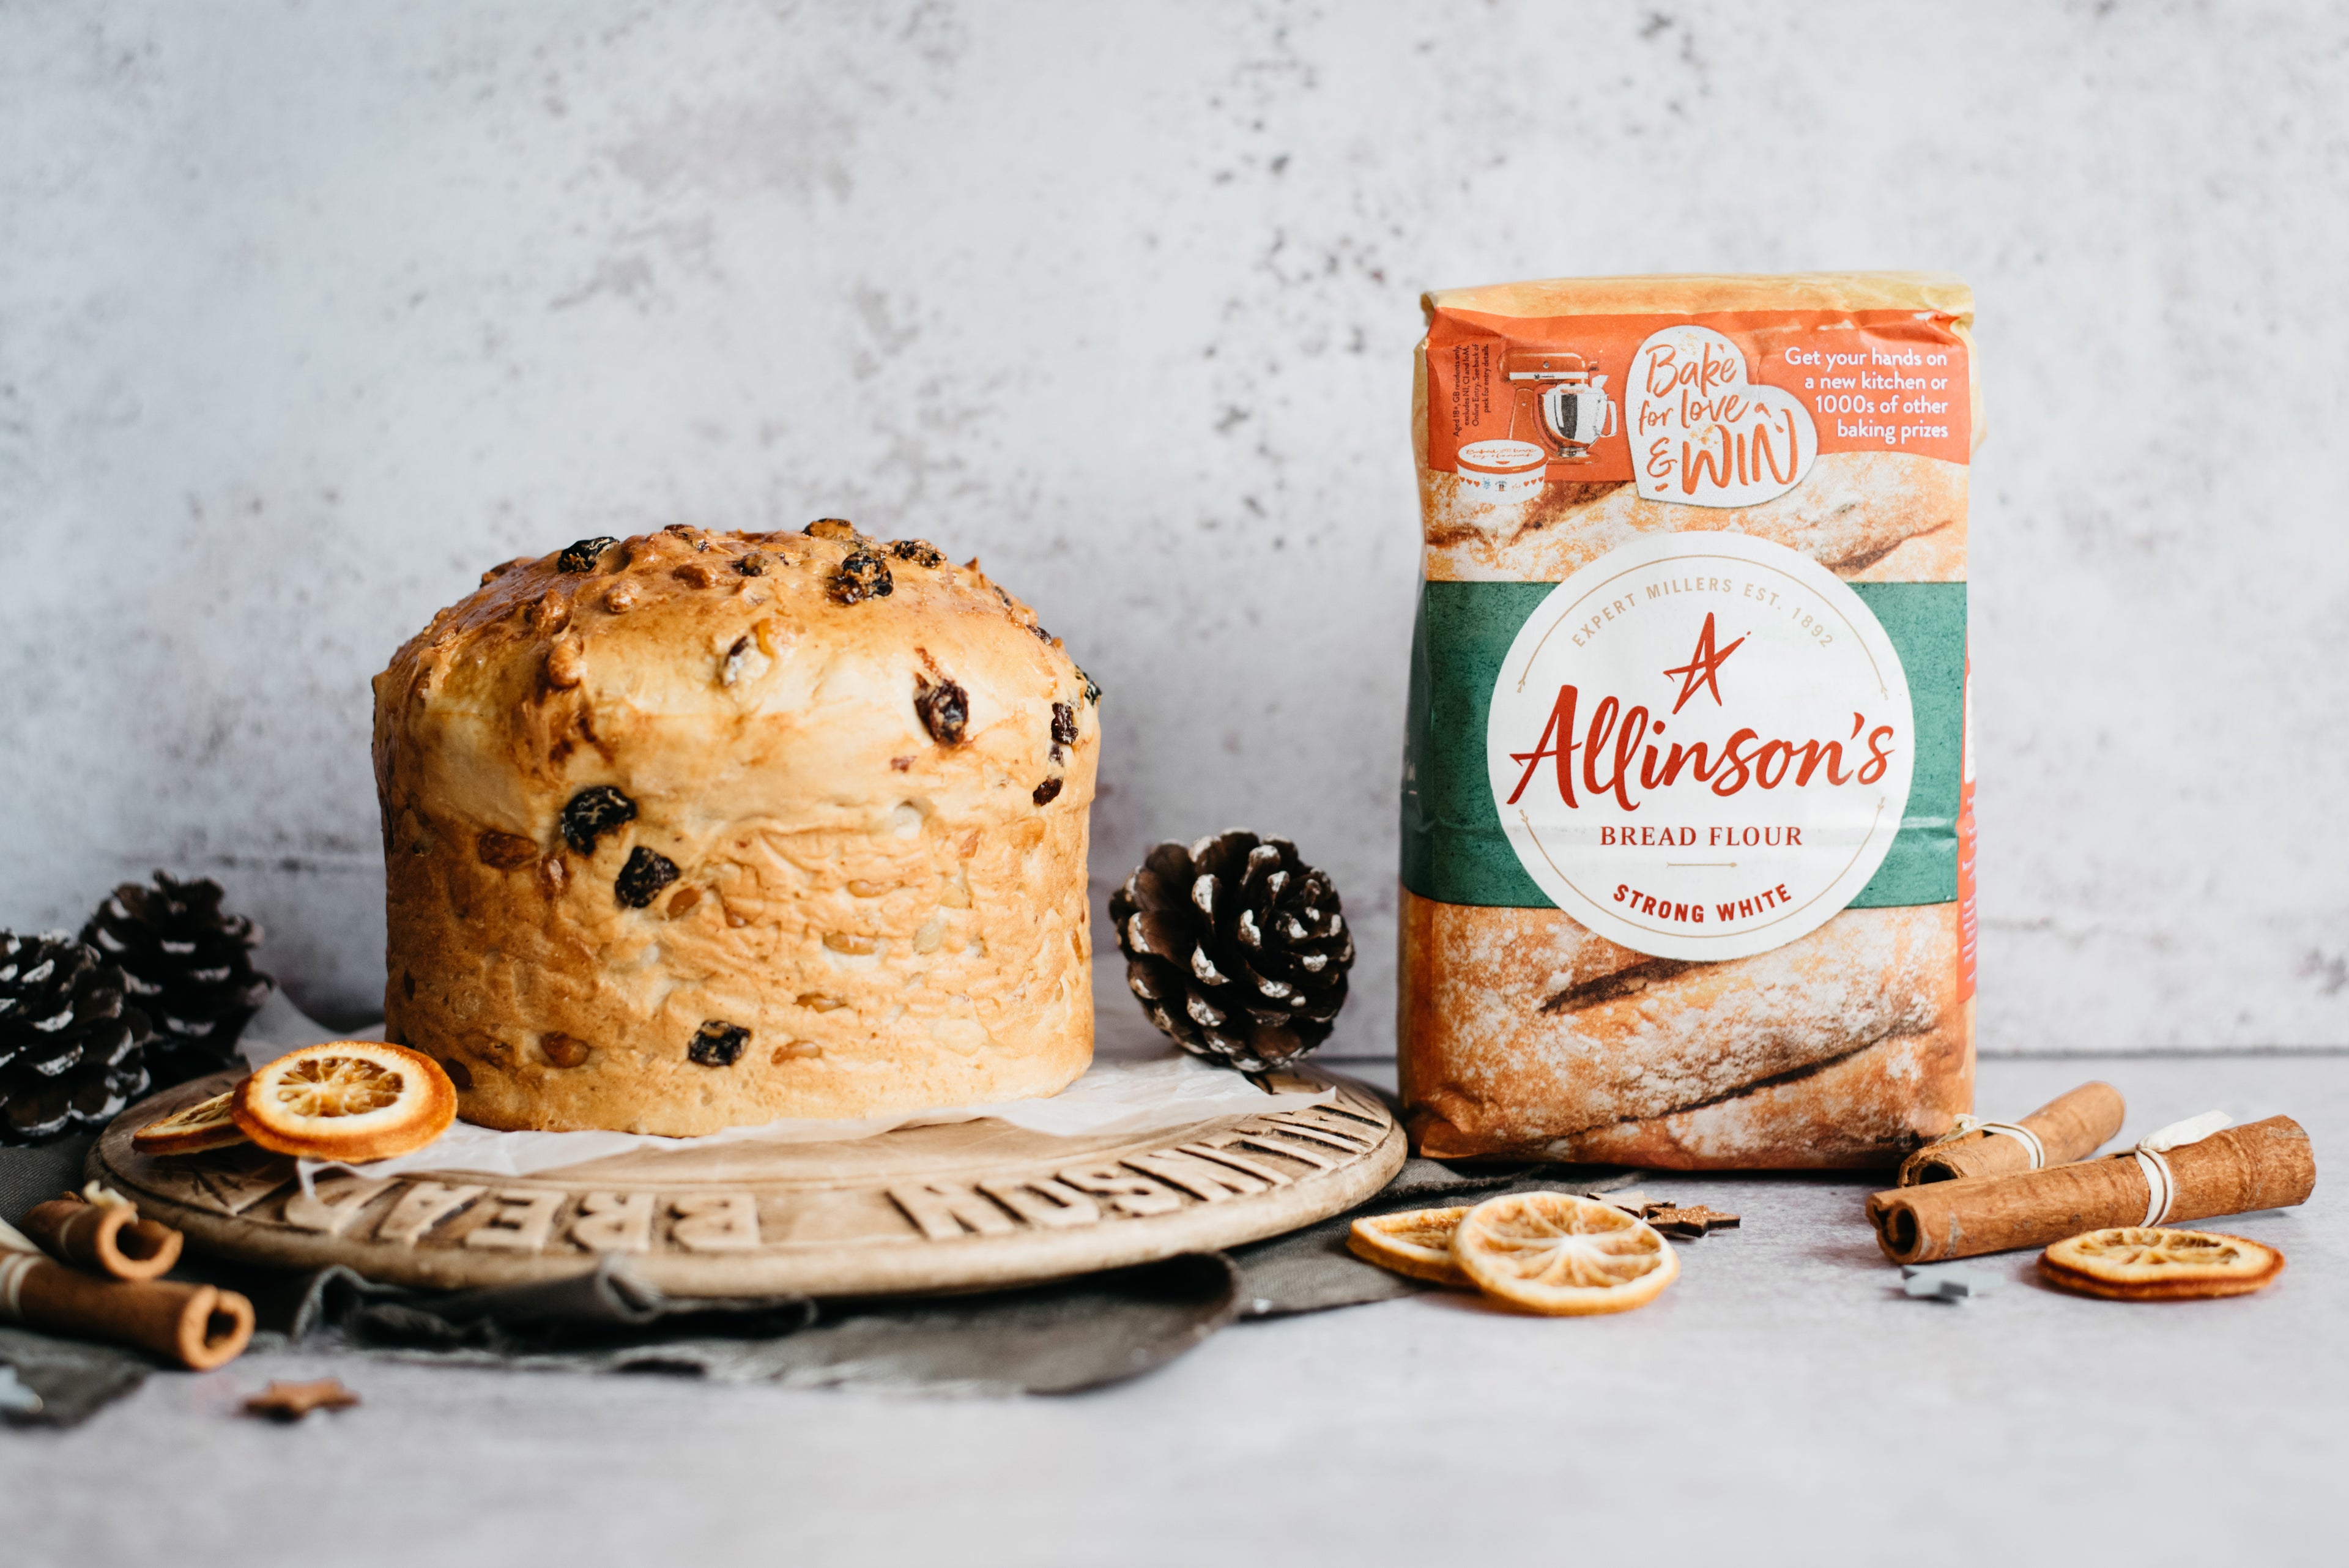 Golden Panettone sat on a wooden serving board, surrounded by cinnamon sticks, dried orange and pine cones, next to a bag of Allinson's Strong White Flour